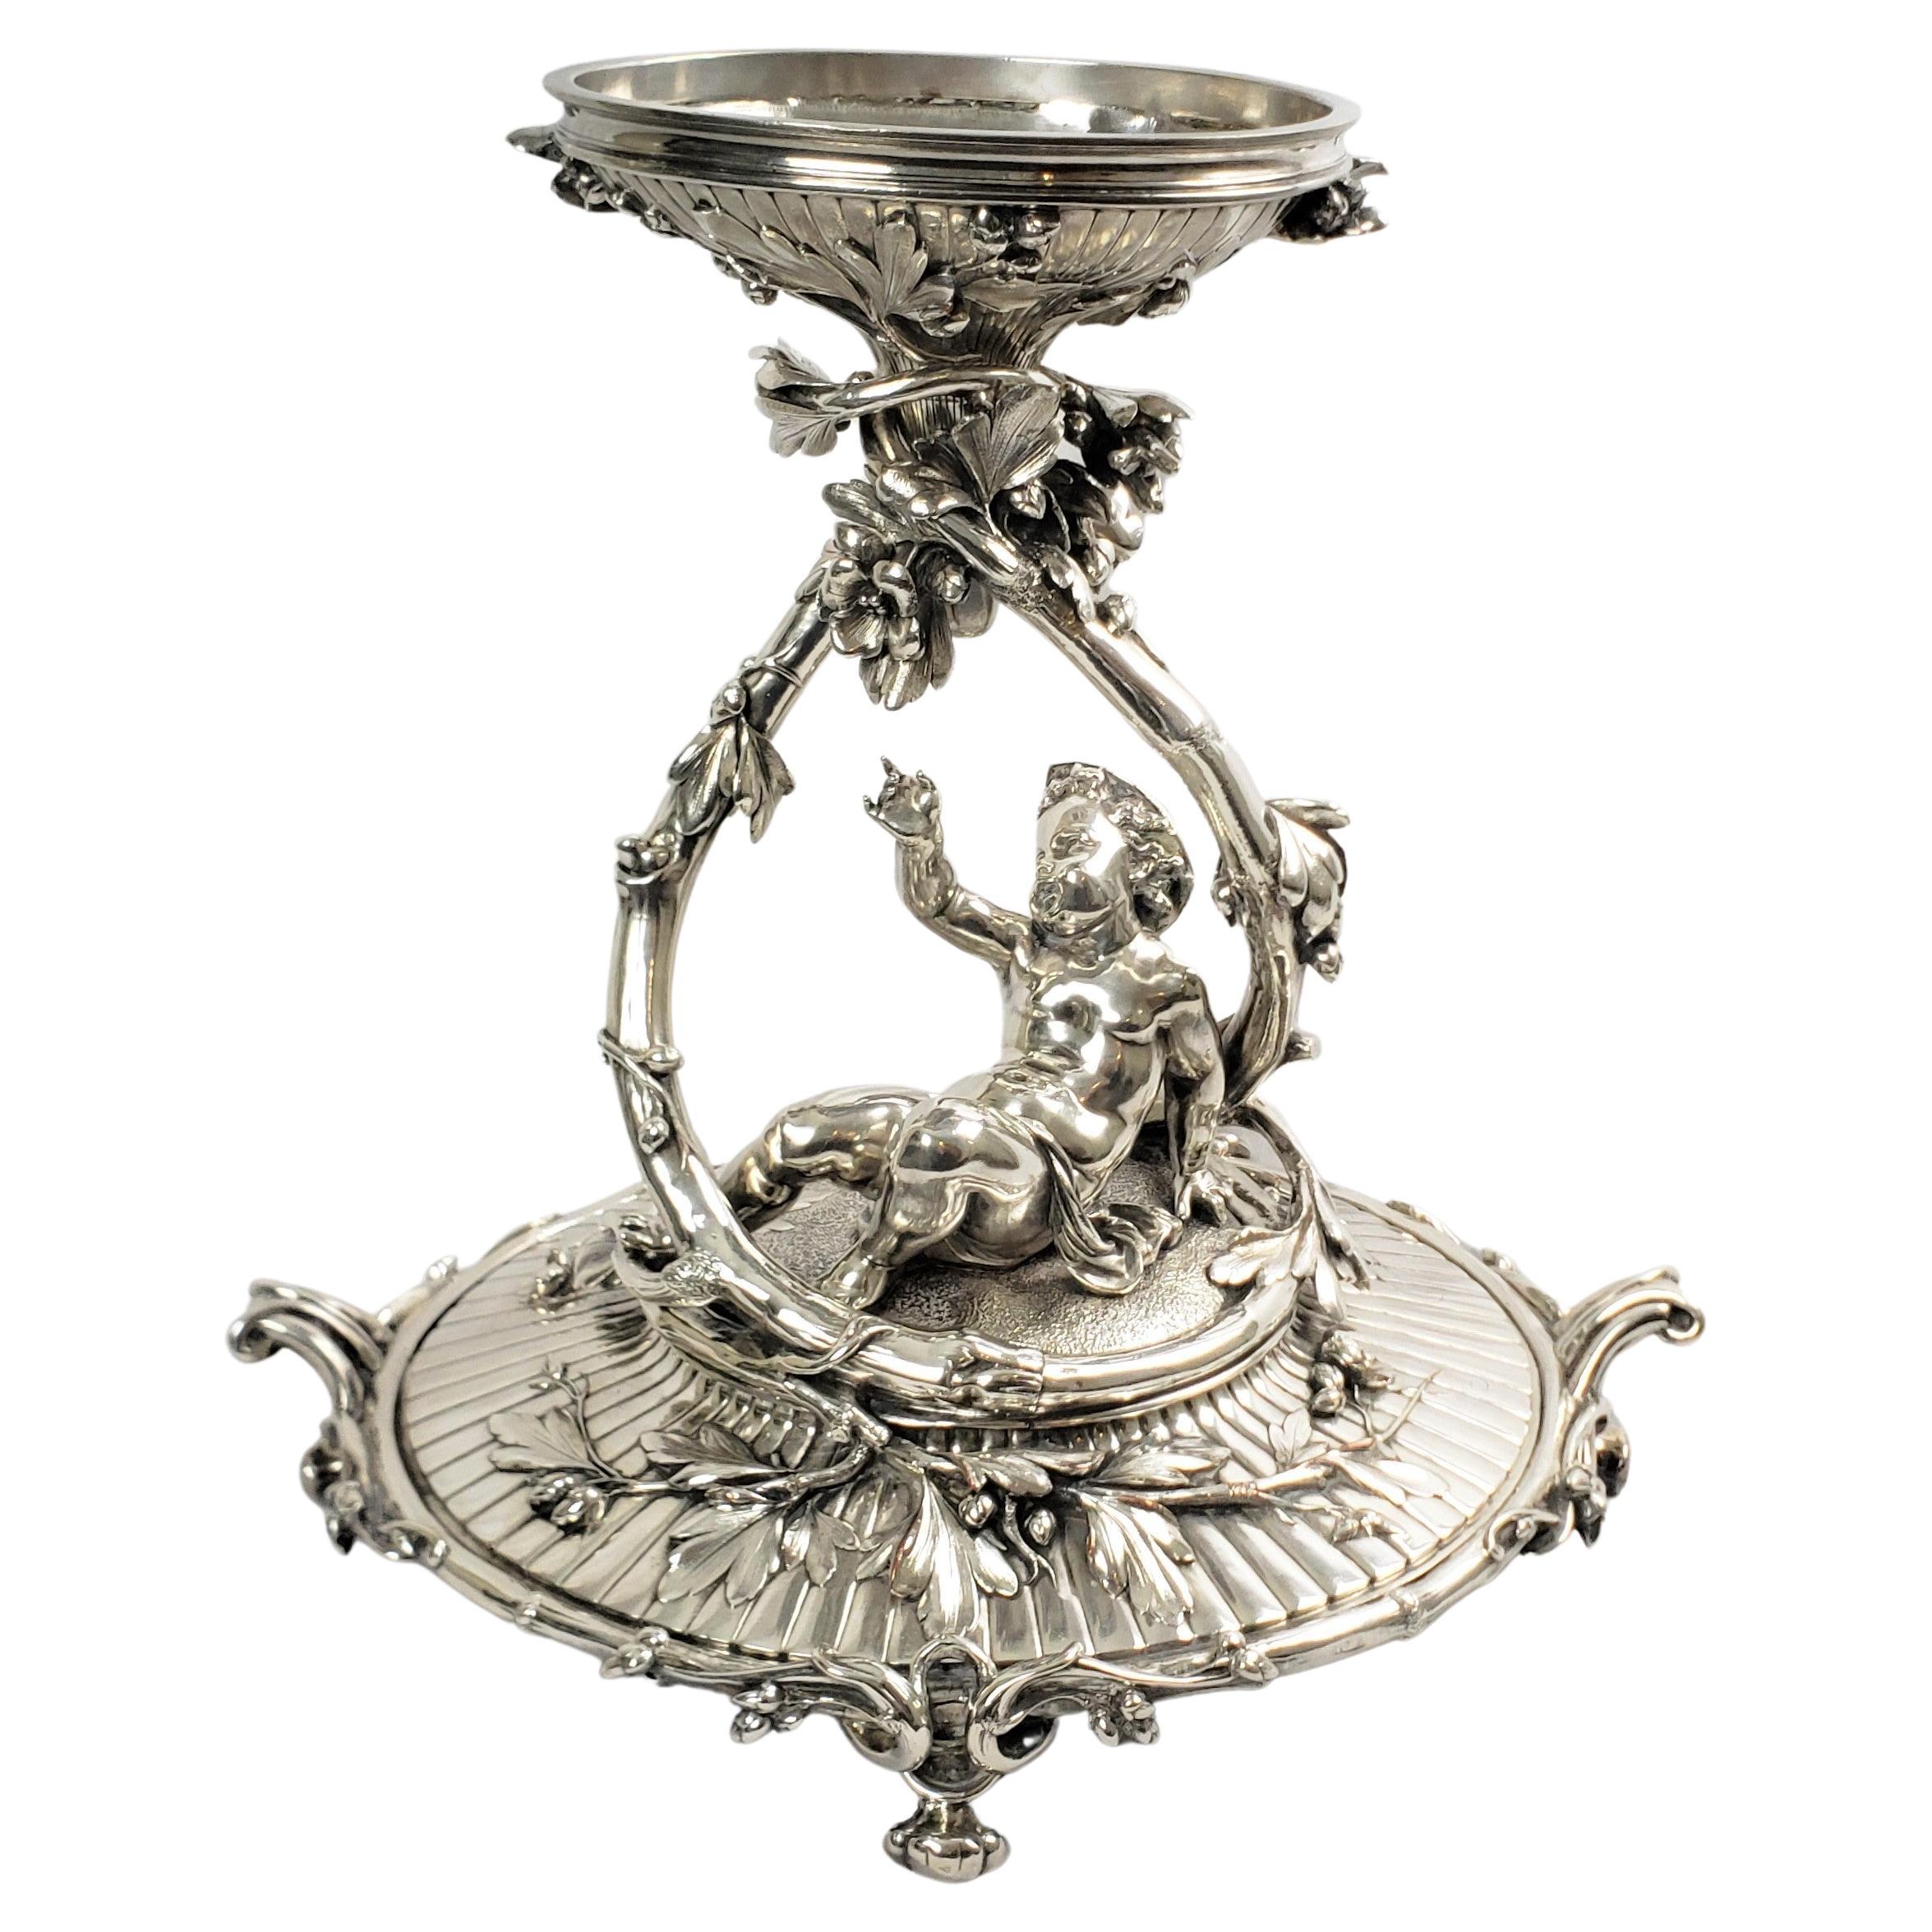 Huge Antique Christofle Silver Plated Centerpiece with a Figural Reclining Child For Sale